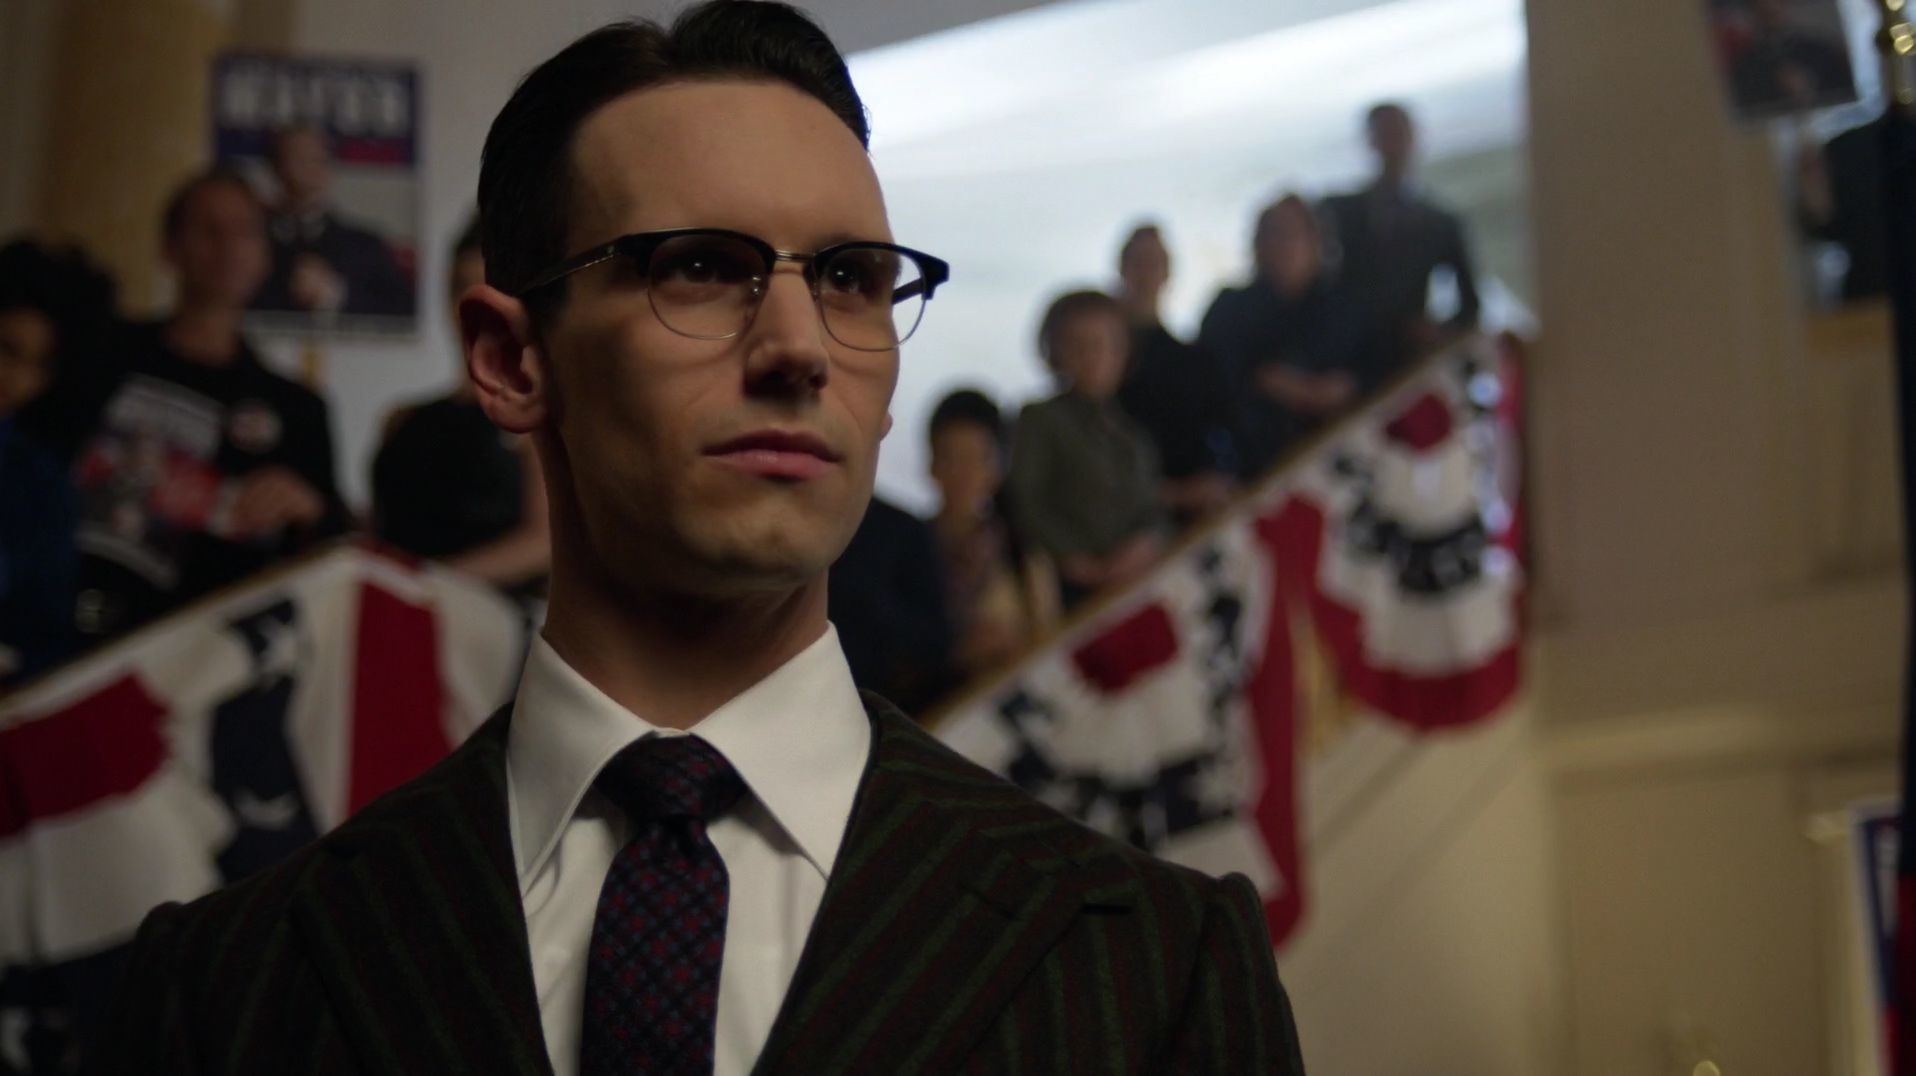 dating edward nygma would include writing your profile on a dating site